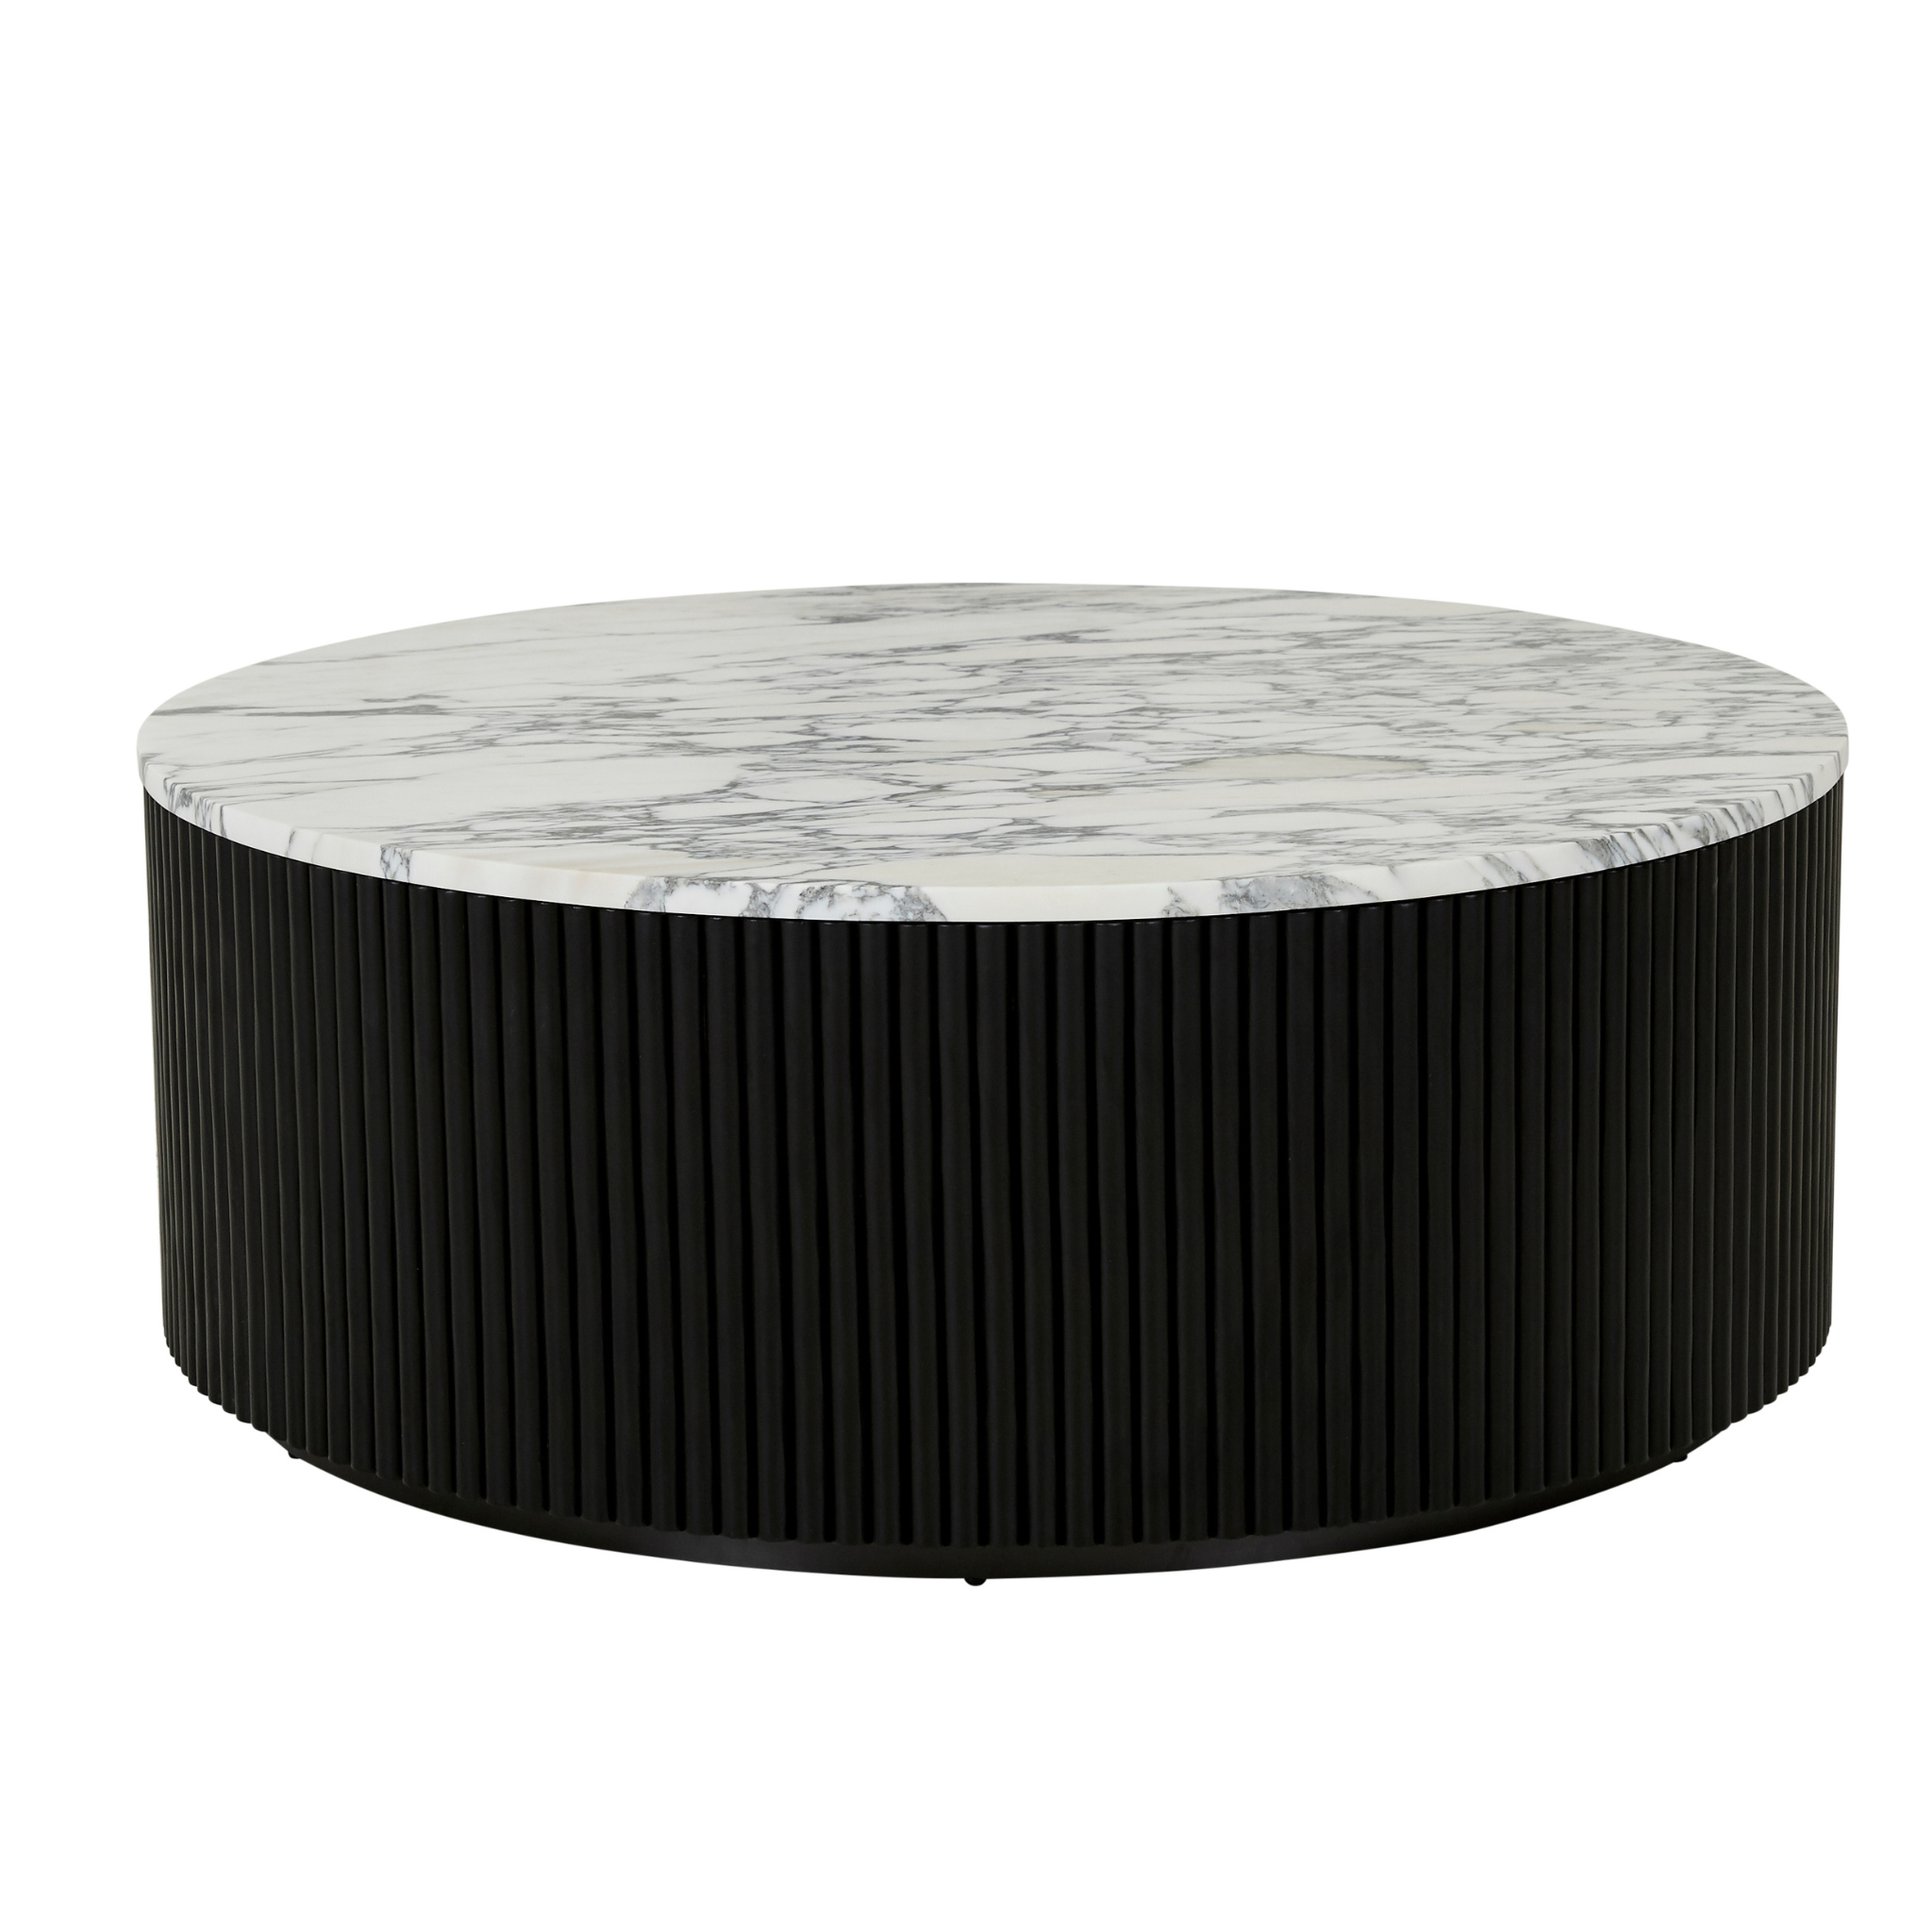 White Marble with Black Oak